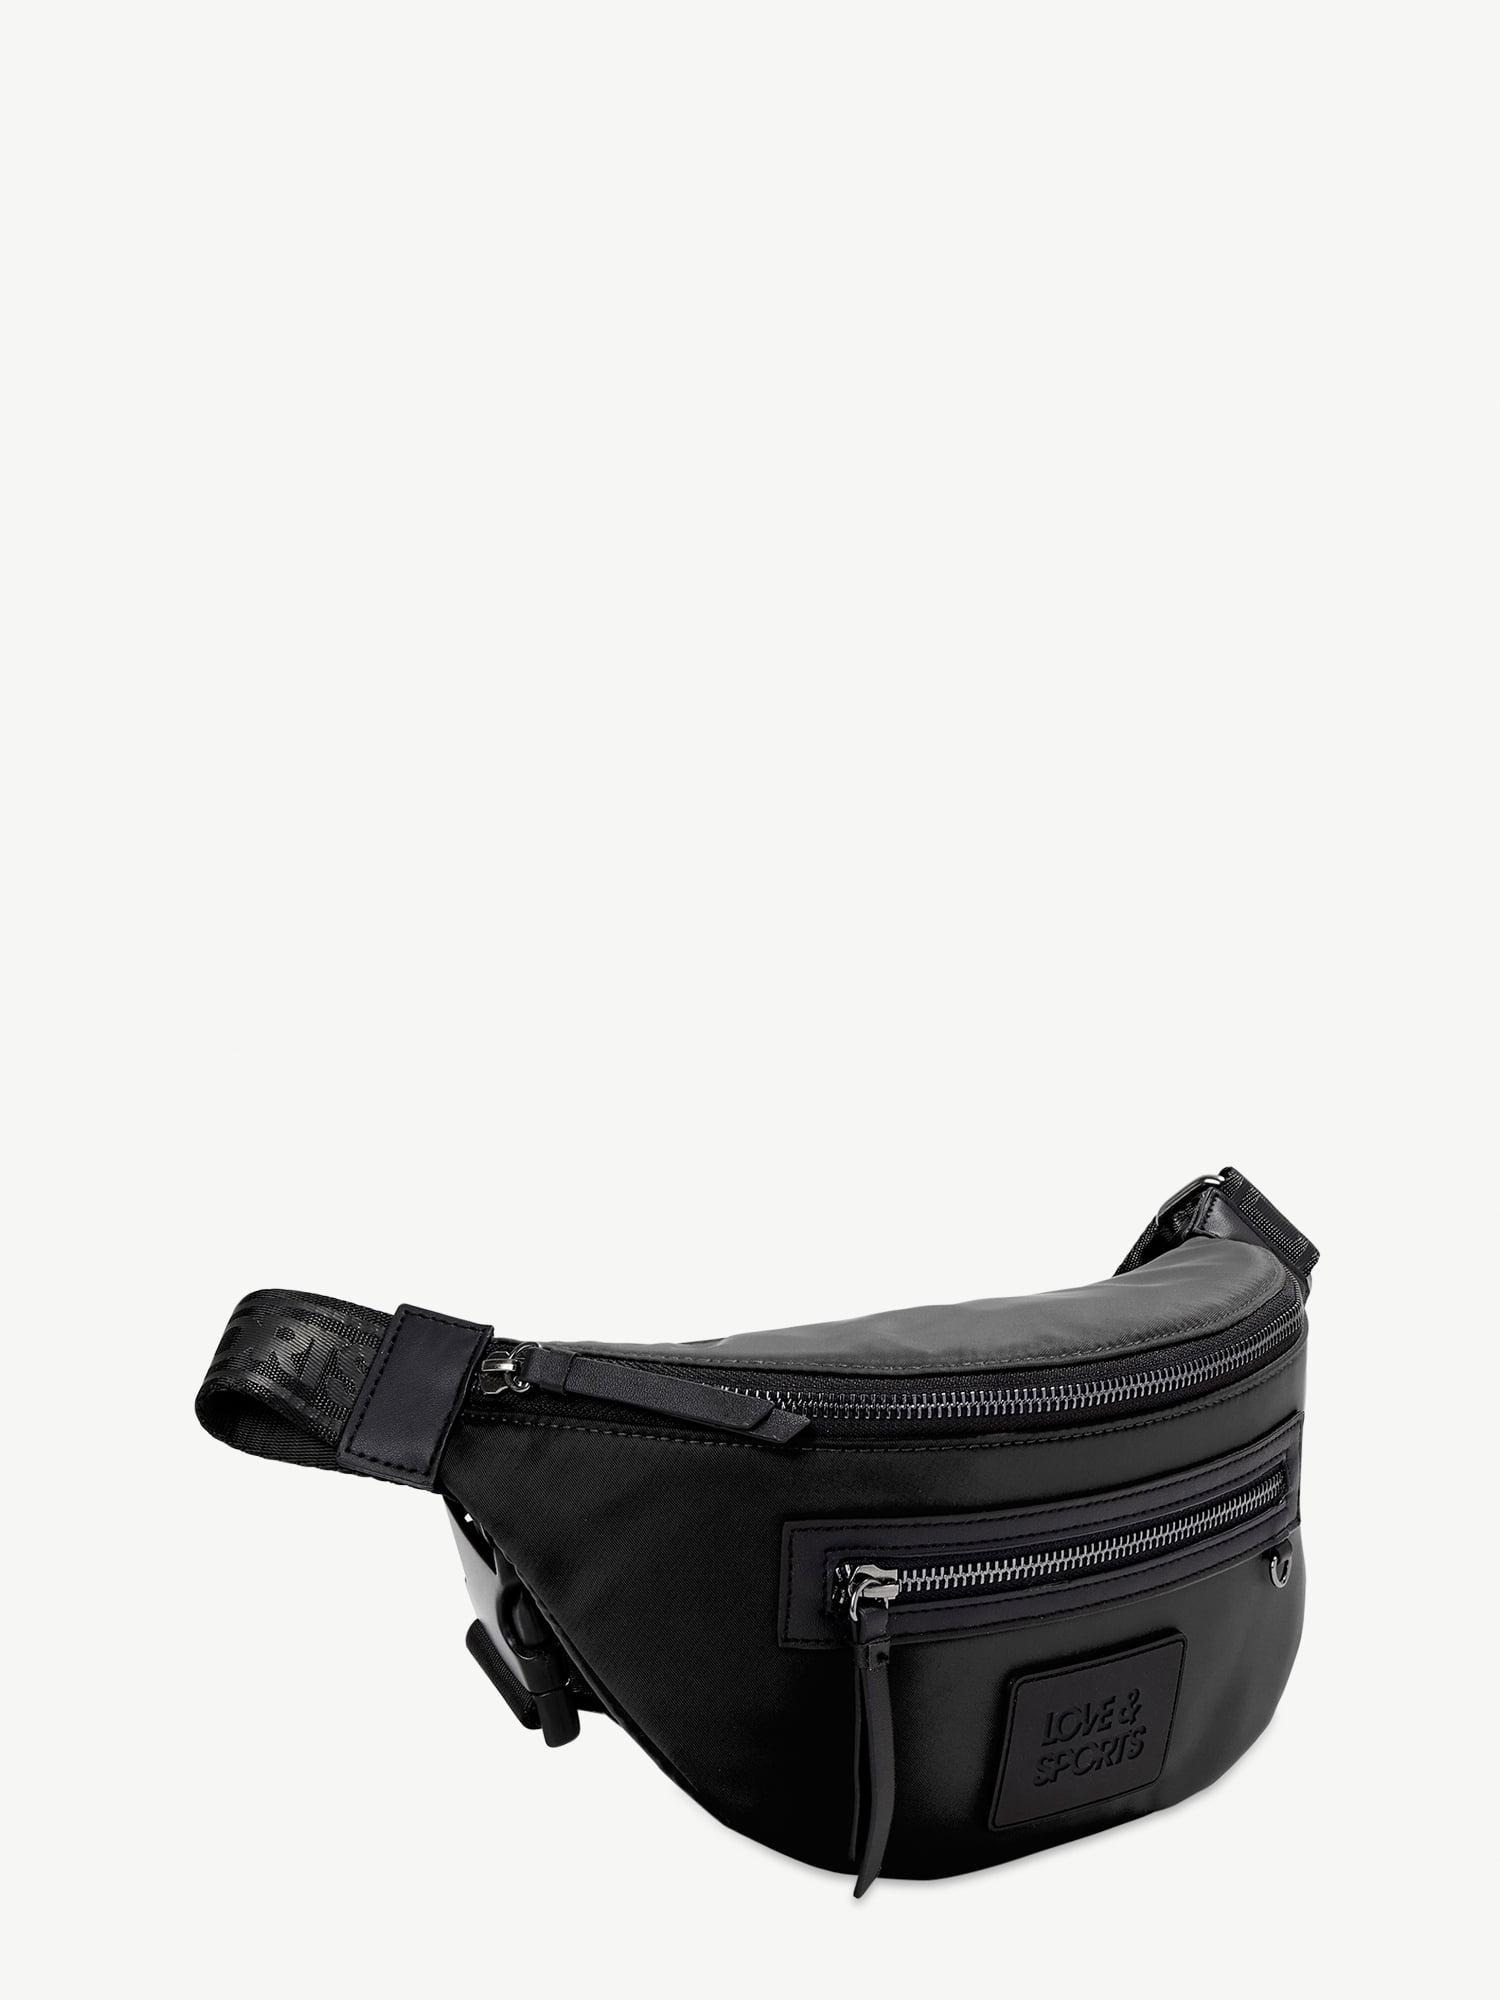 Horde Wow Fanny Pack Soft Black Pleather Belt Bag With 